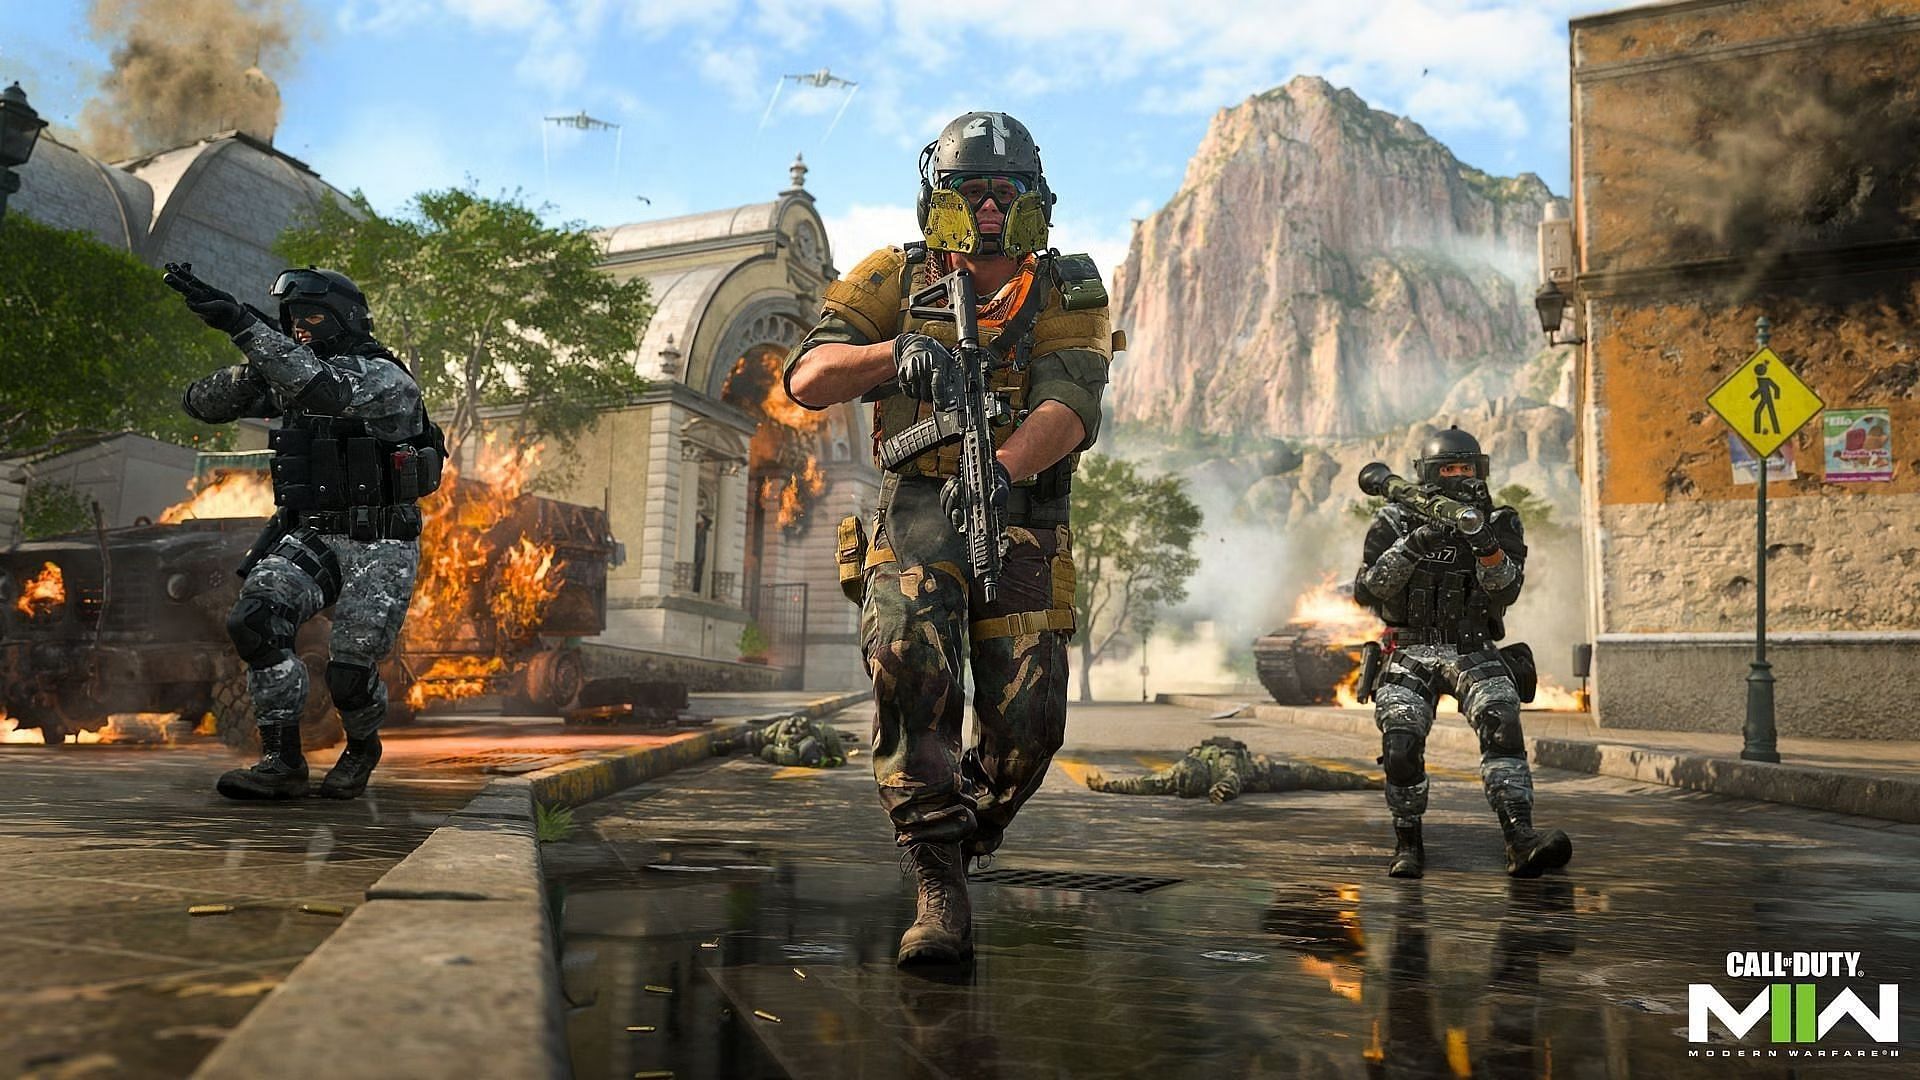 Himmelmatt Expo has been added to the latest map rotation in both CDL and Ranked Play (Image via Activision)